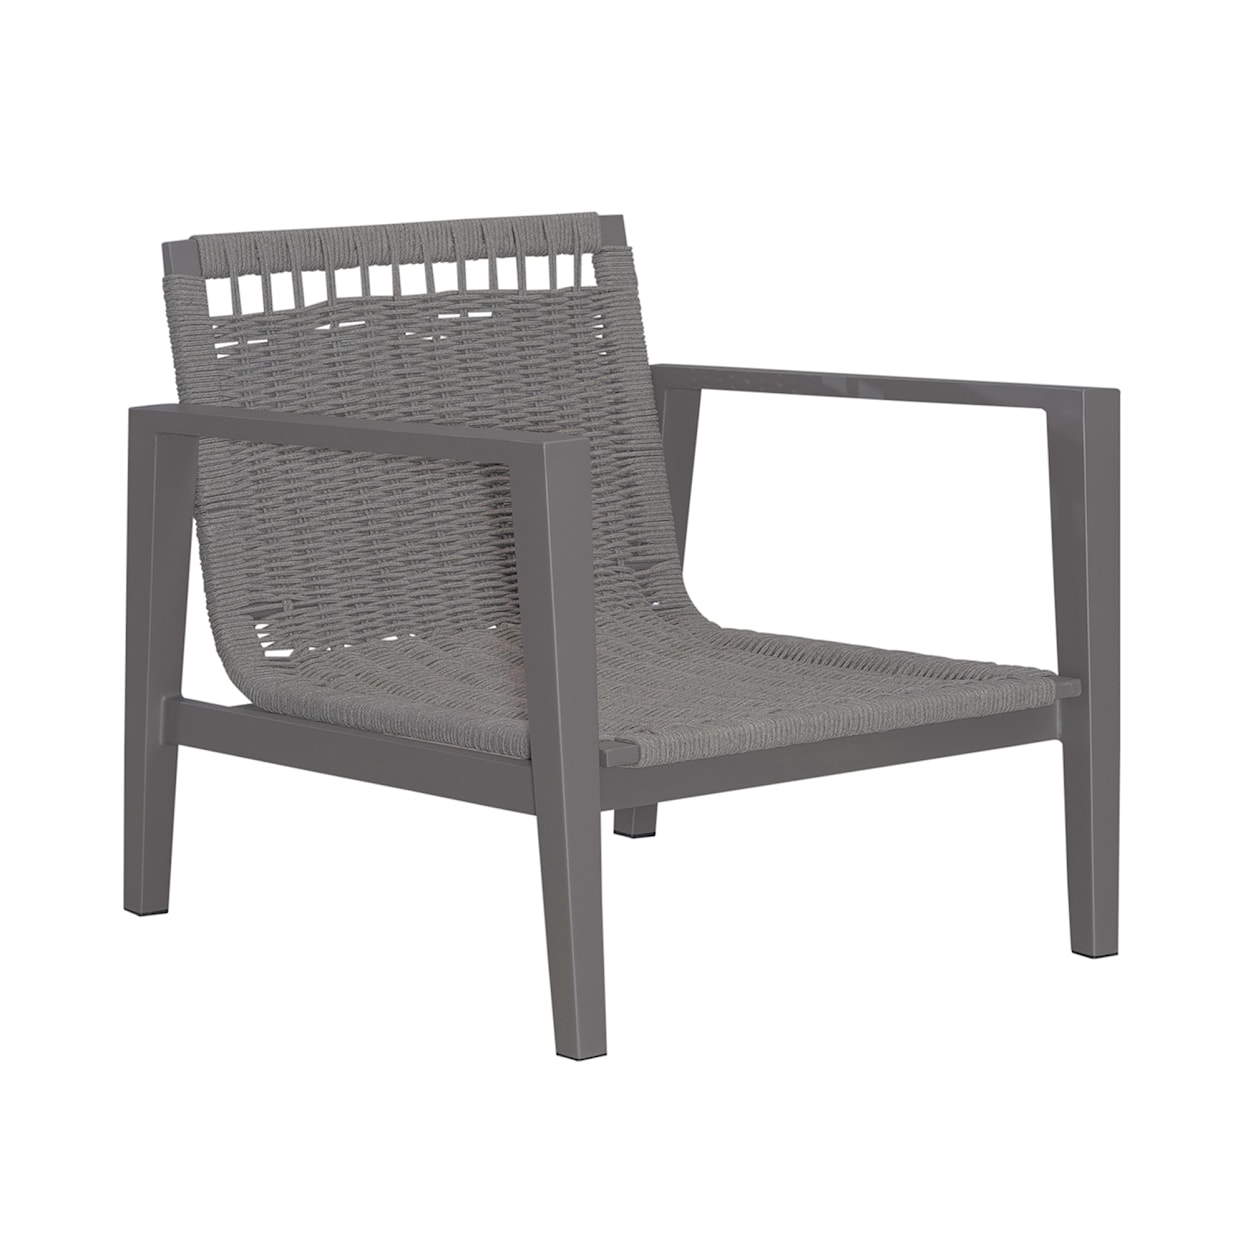 Liberty Furniture Plantation Key Outdoor Accent Chair